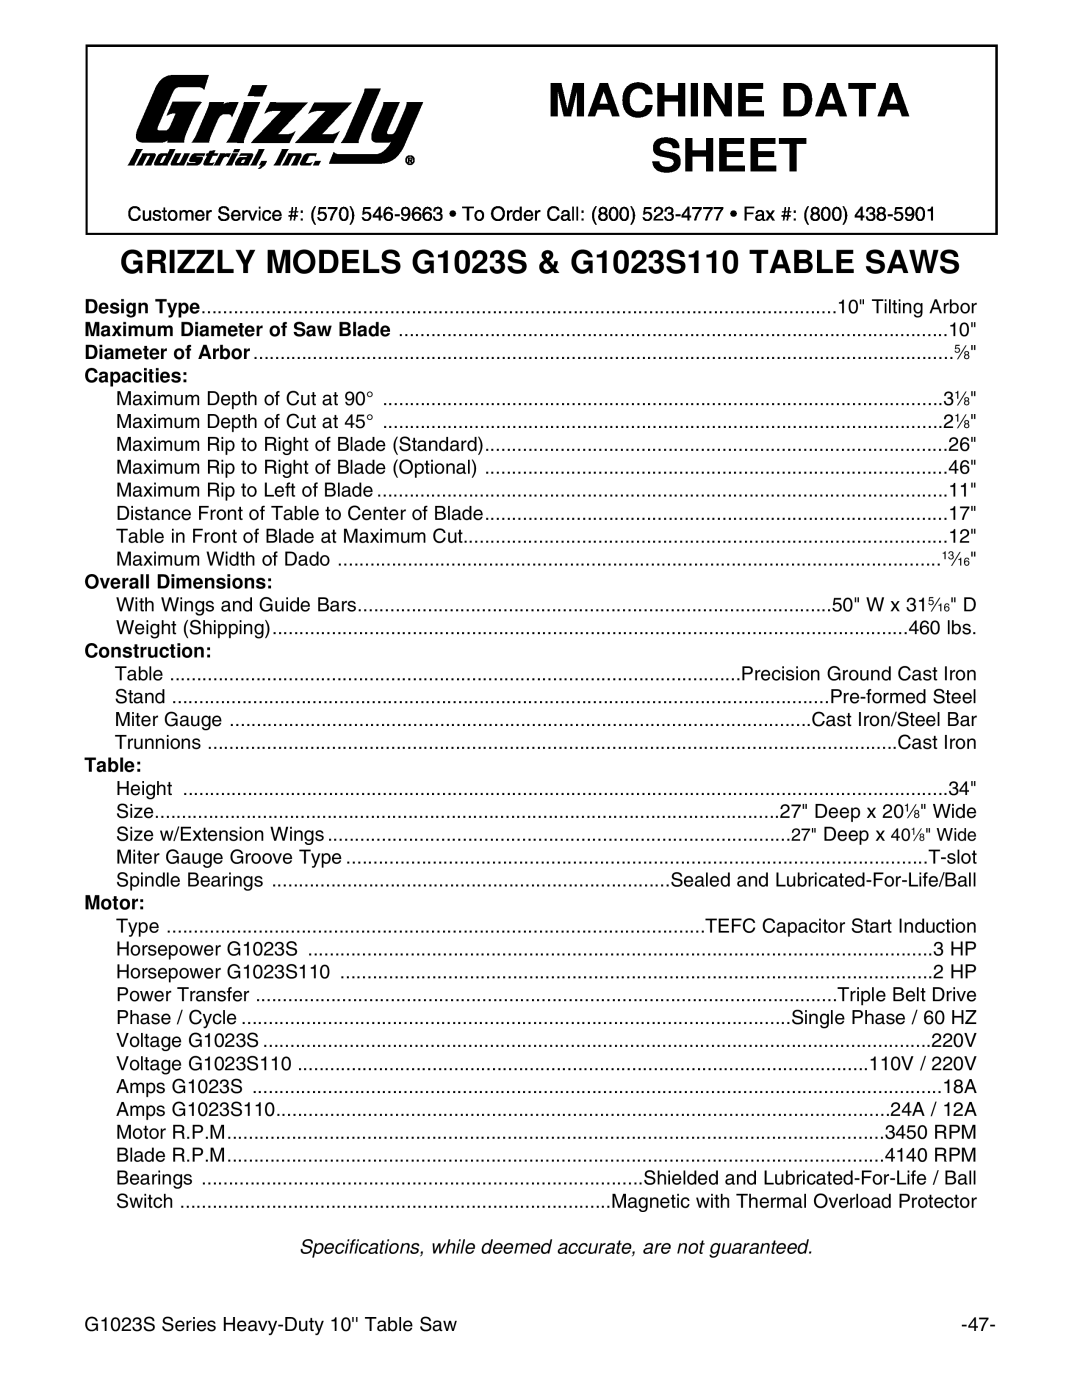 Grizzly instruction manual GRIZZLY MODELS G1023S & G1023S110 TABLE SAWS, Machine Data Sheet 